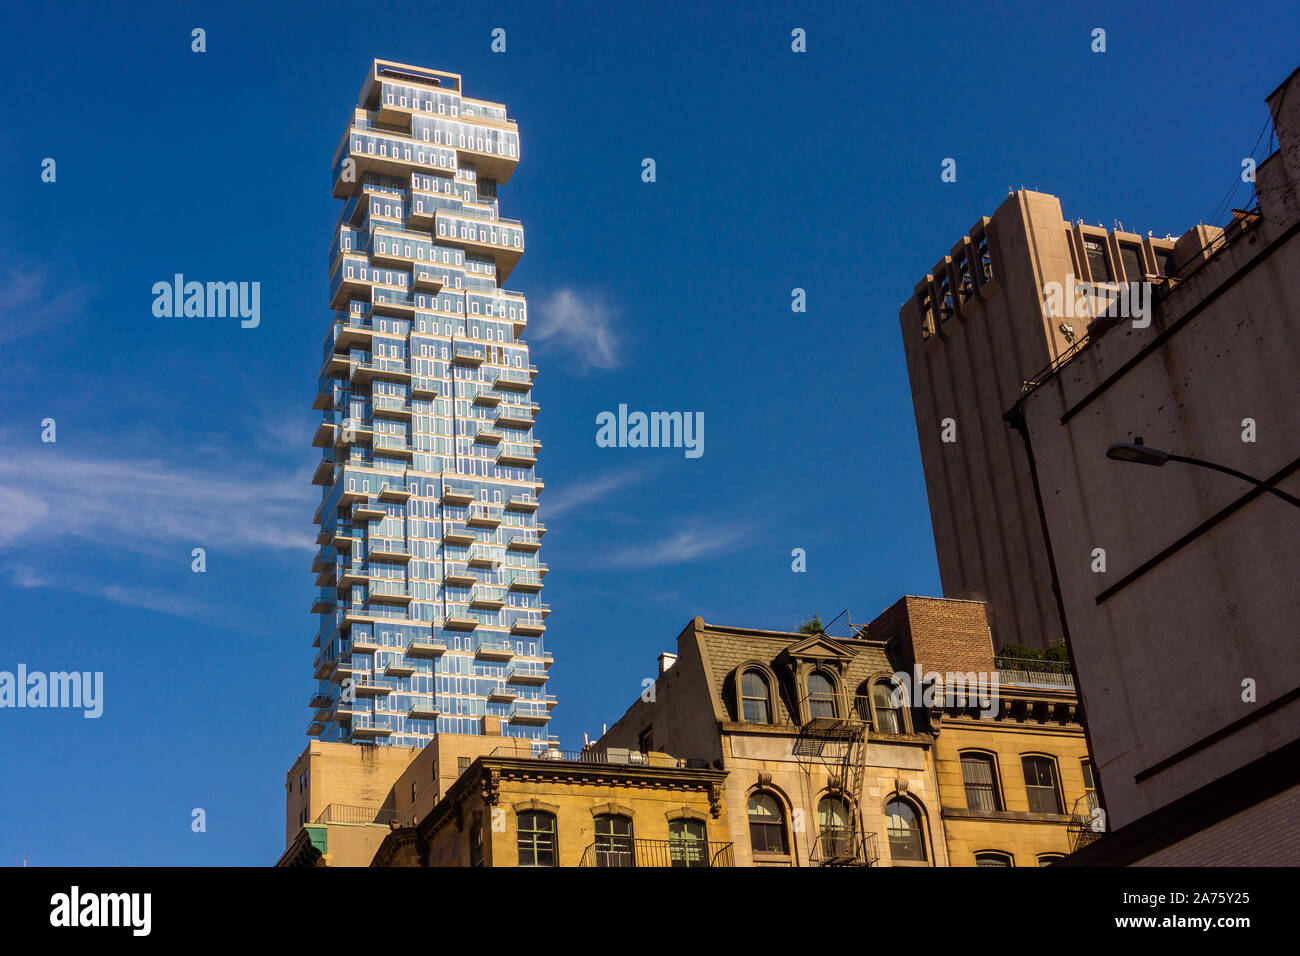 The condo skyscraper at 56 Leonard Street looms over lower Tribeca buildings in New York on Saturday, October 19, 2019. 56 Leonard Street, designed by Herzog & de Meuron is 820 feet high with 145 apartments. (© Richard B. Levine) Stock Photo